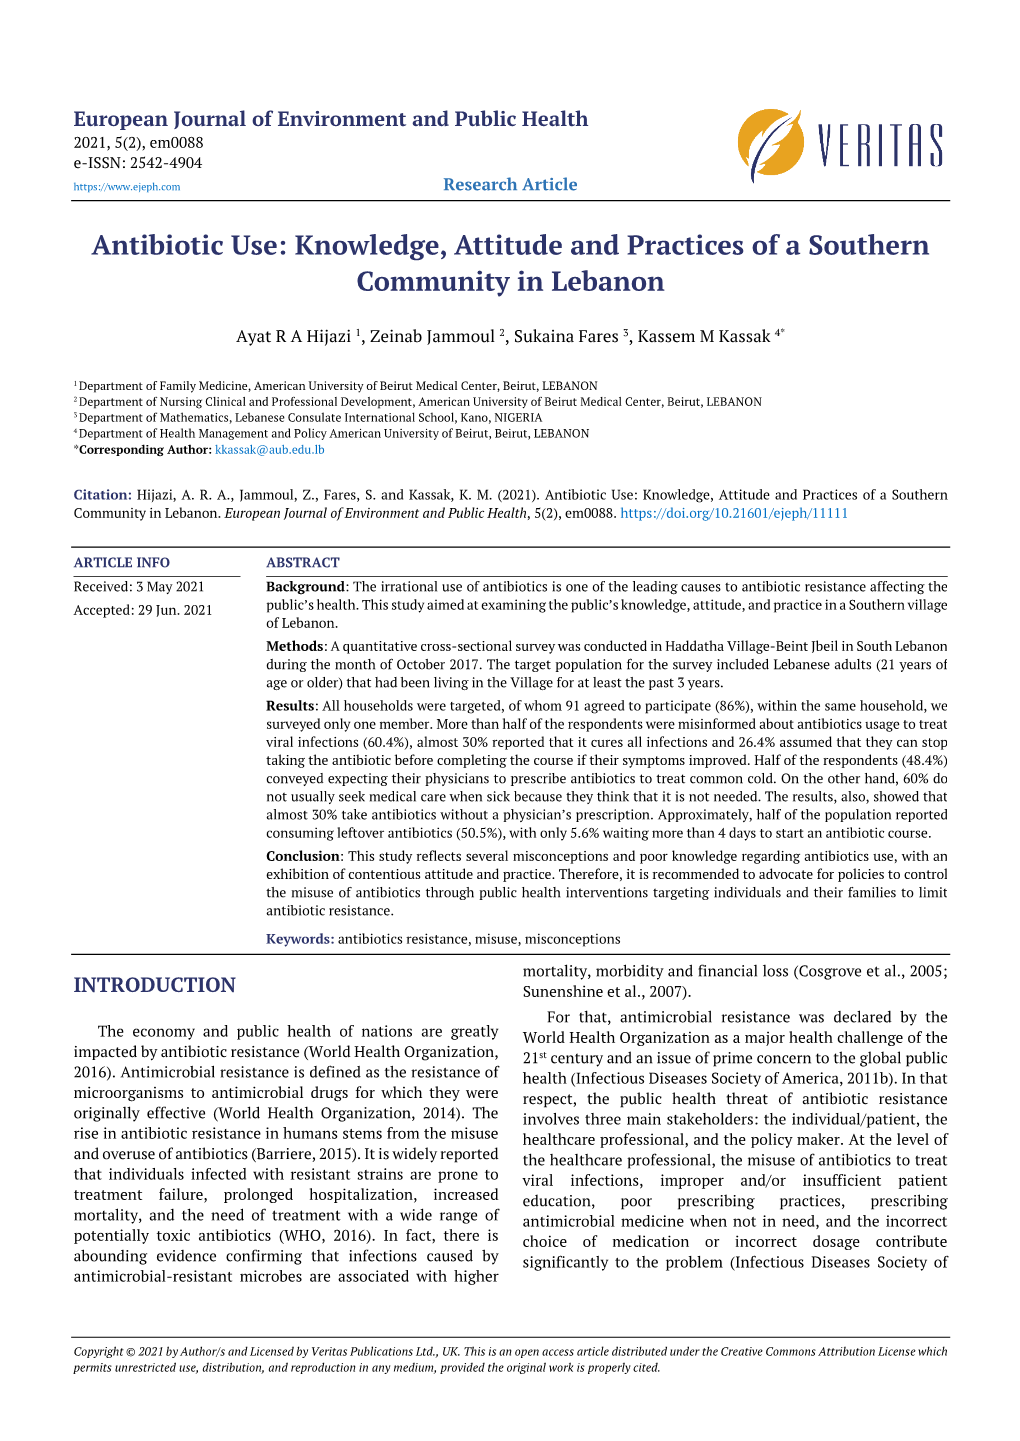 Antibiotic Use: Knowledge, Attitude and Practices of a Southern Community in Lebanon